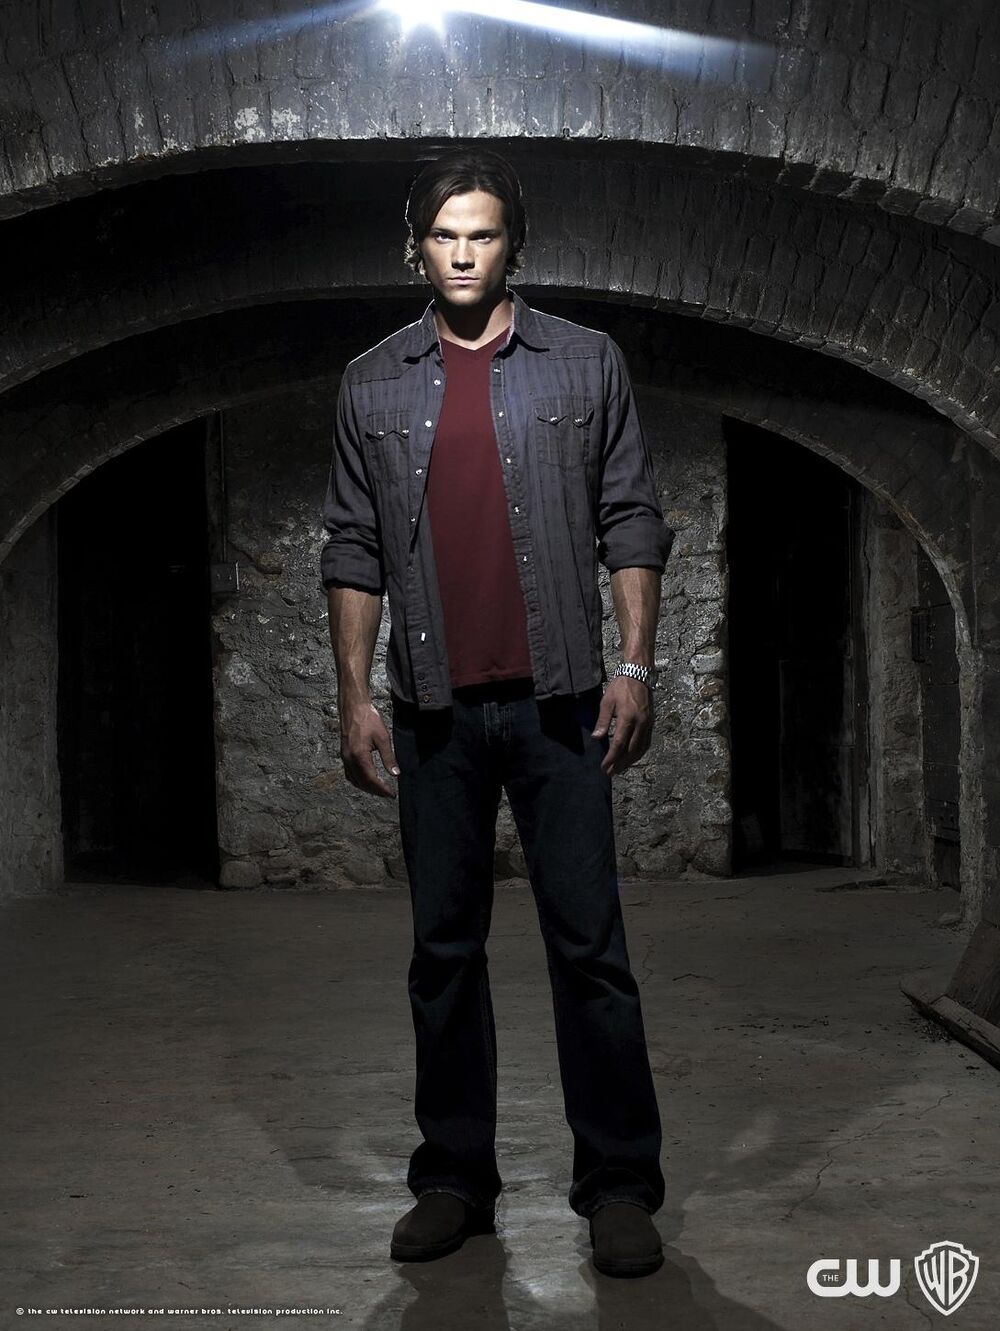 Promo picture for season 4. Tall man with brown hair wearing jeans and a red undershirt beneath an unbuttoned work shirt with the sleeves rolled up. He's staring into the camera looking dark and mysterious.